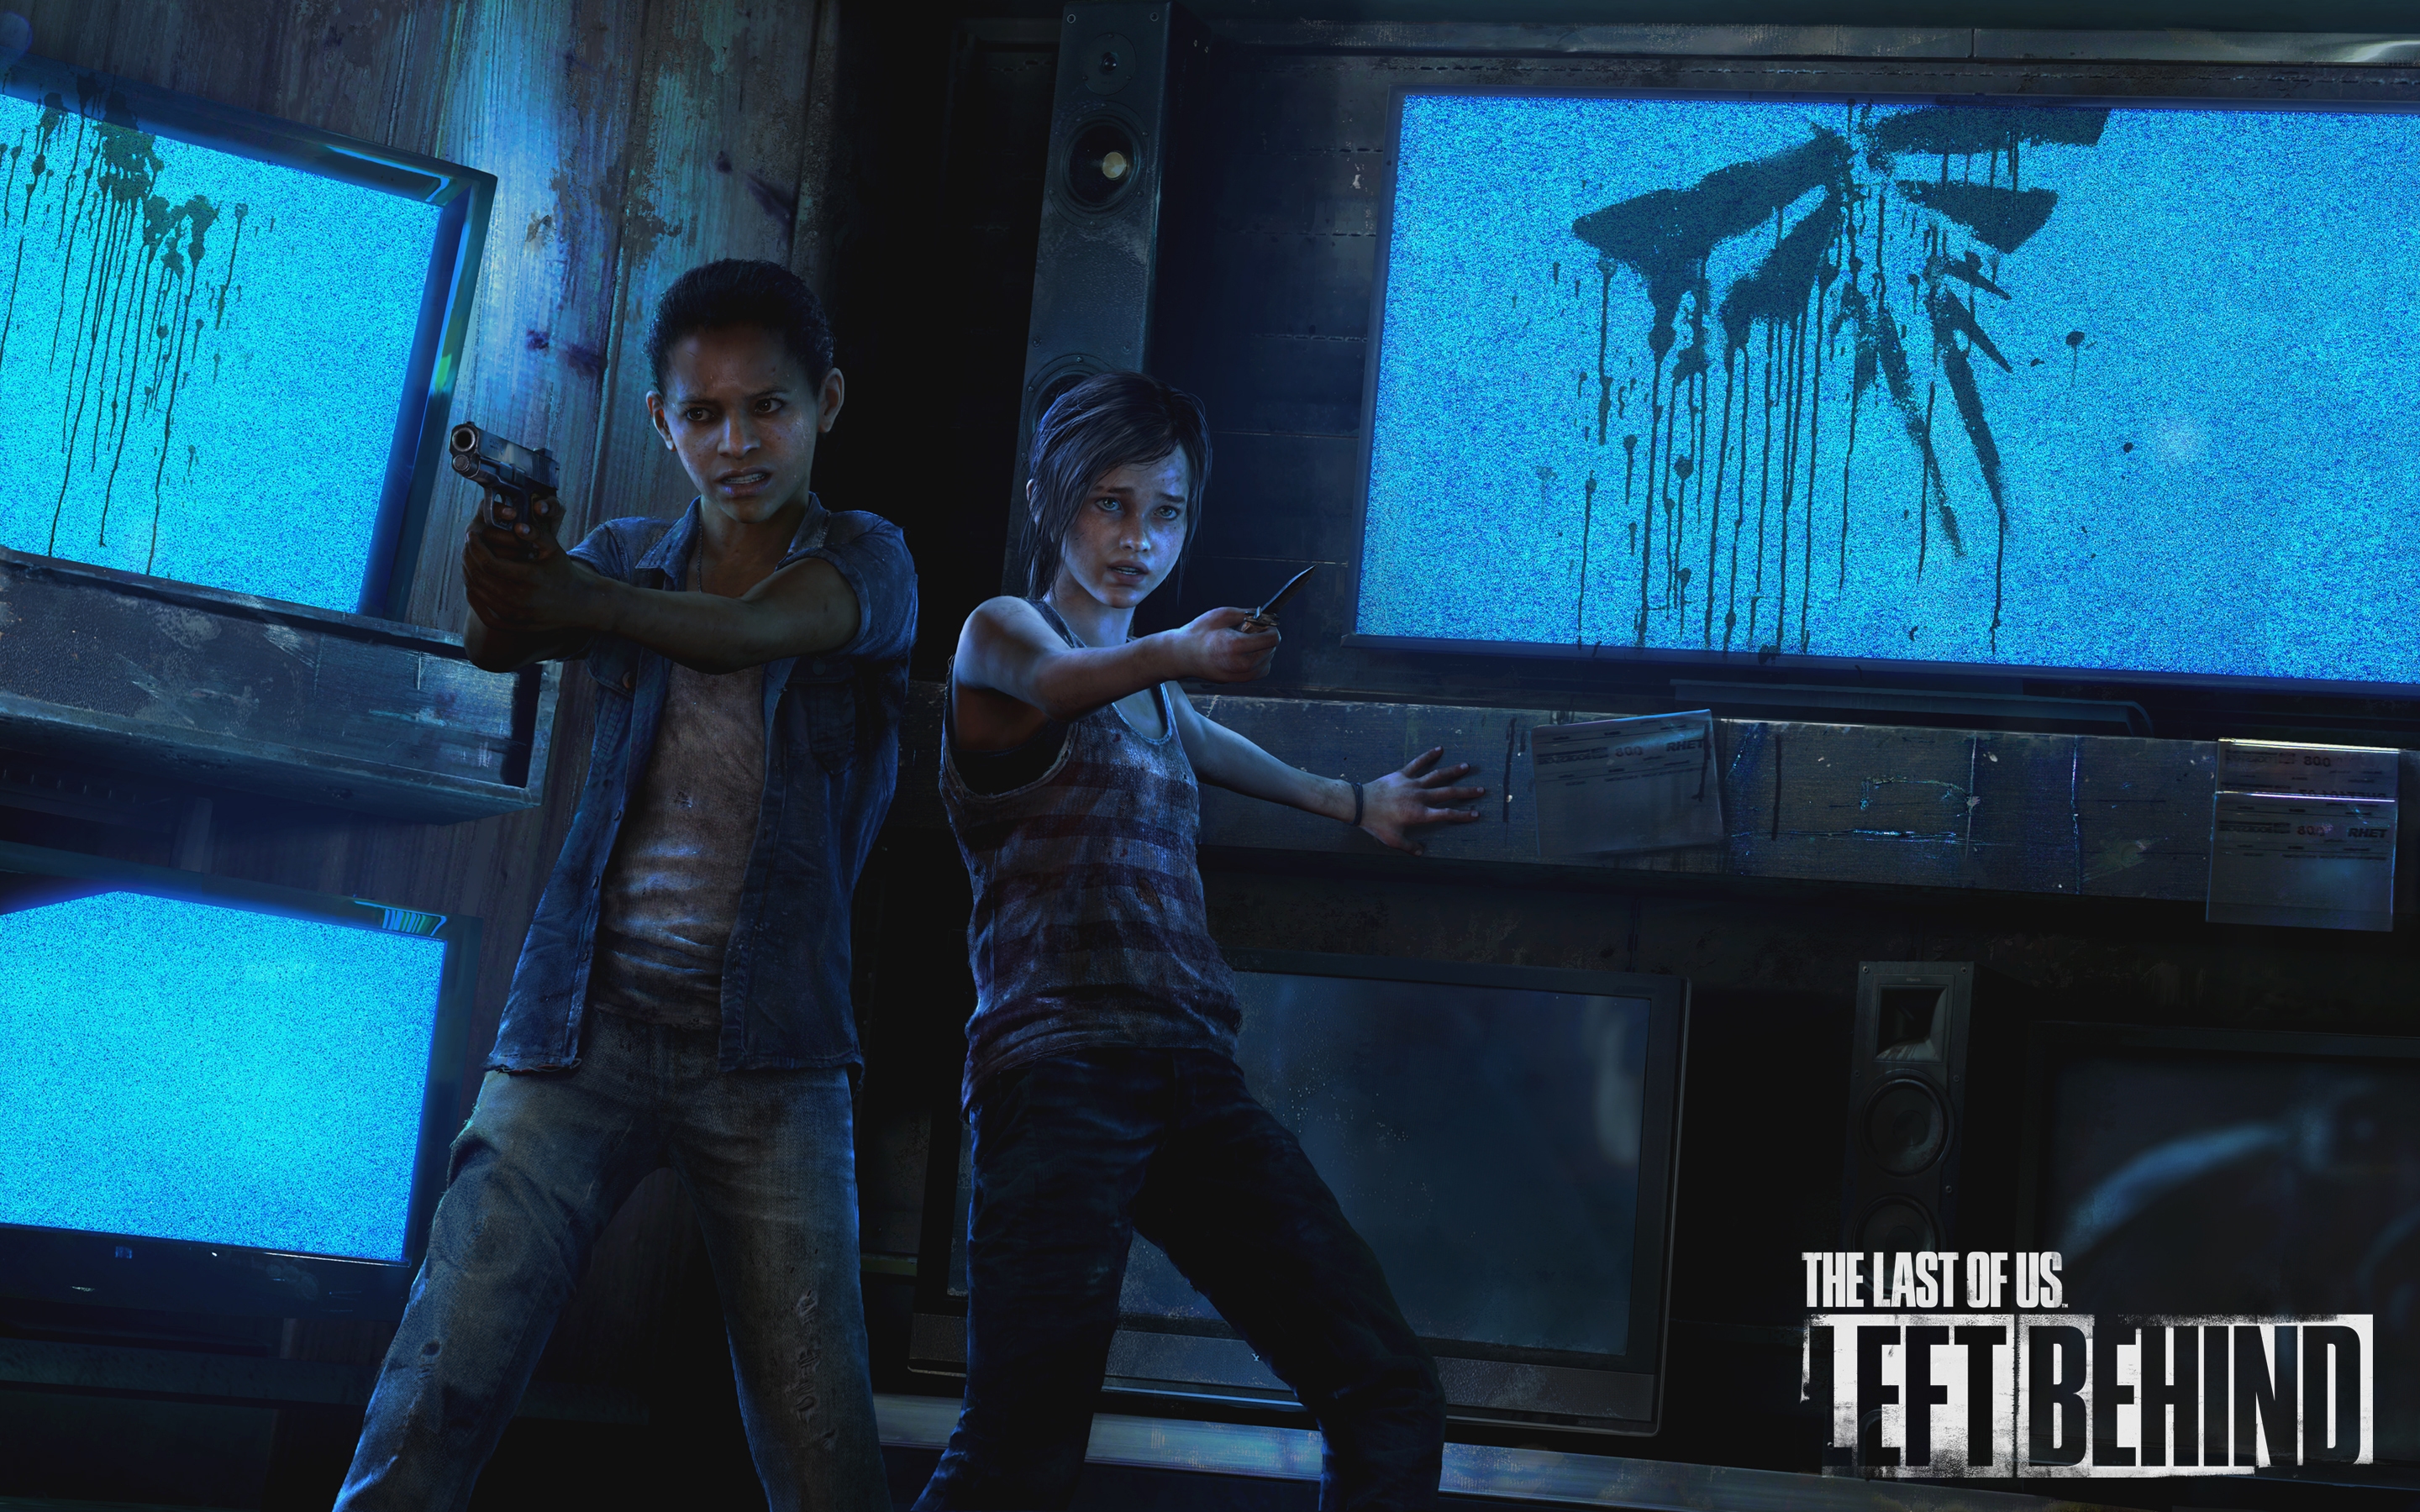 The Last Of Us Left Behind for 2880 x 1800 Retina Display resolution